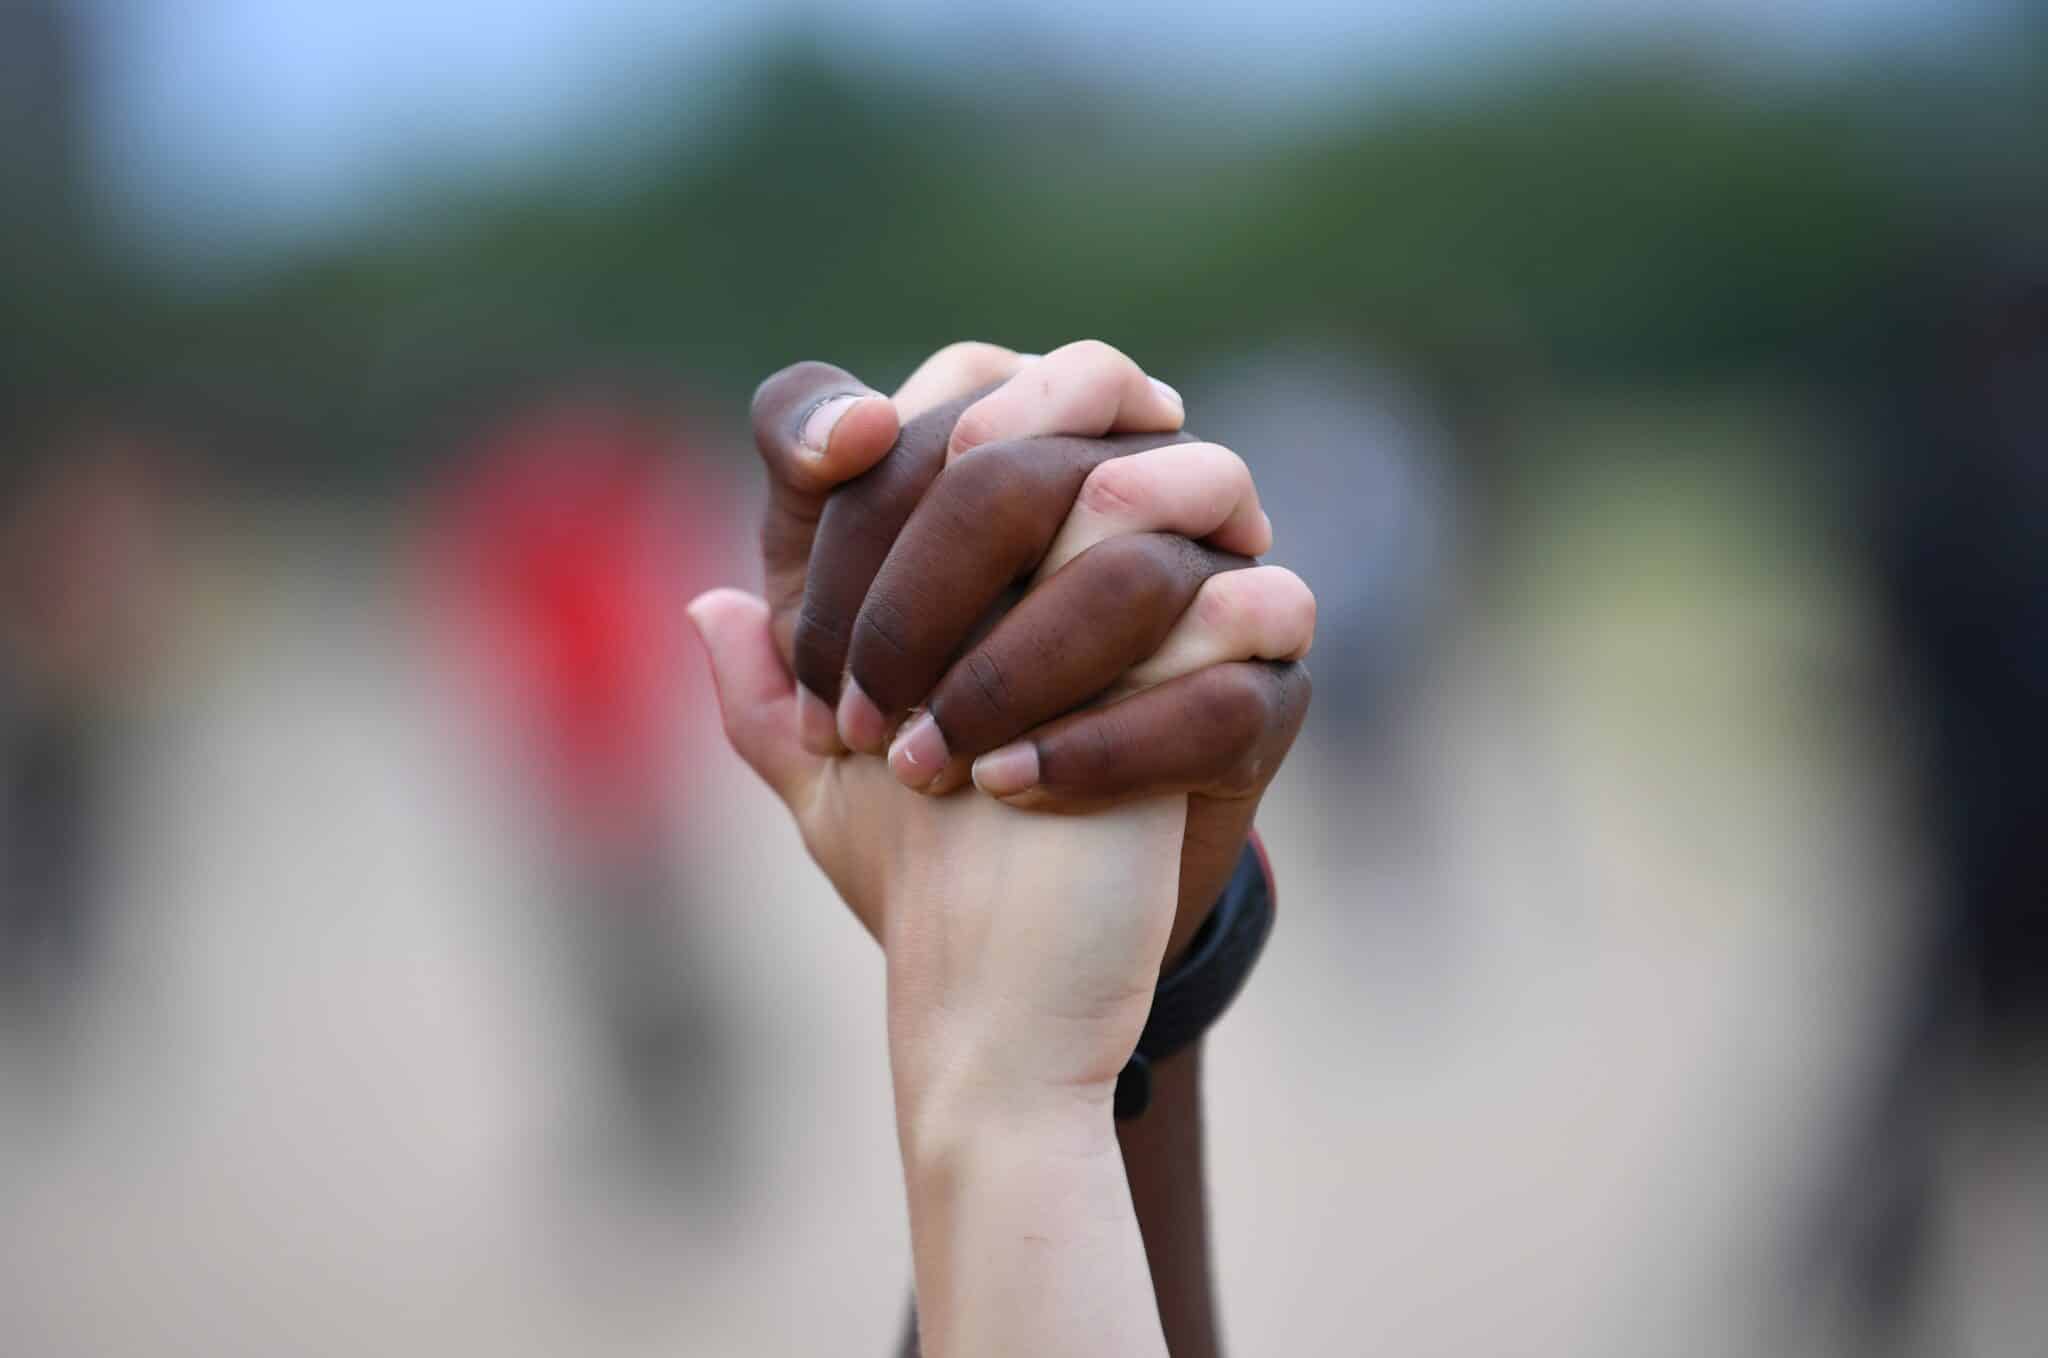 A man and woman hold hands in London's Hyde Park during a "Black Lives Matter" protest June 3, 2020, following the death of George Floyd, an African American man who was taken into custody by Minneapolis police and later died at a Minneapolis hospital. (CNS photo/Dylan Martinez, Reuters)